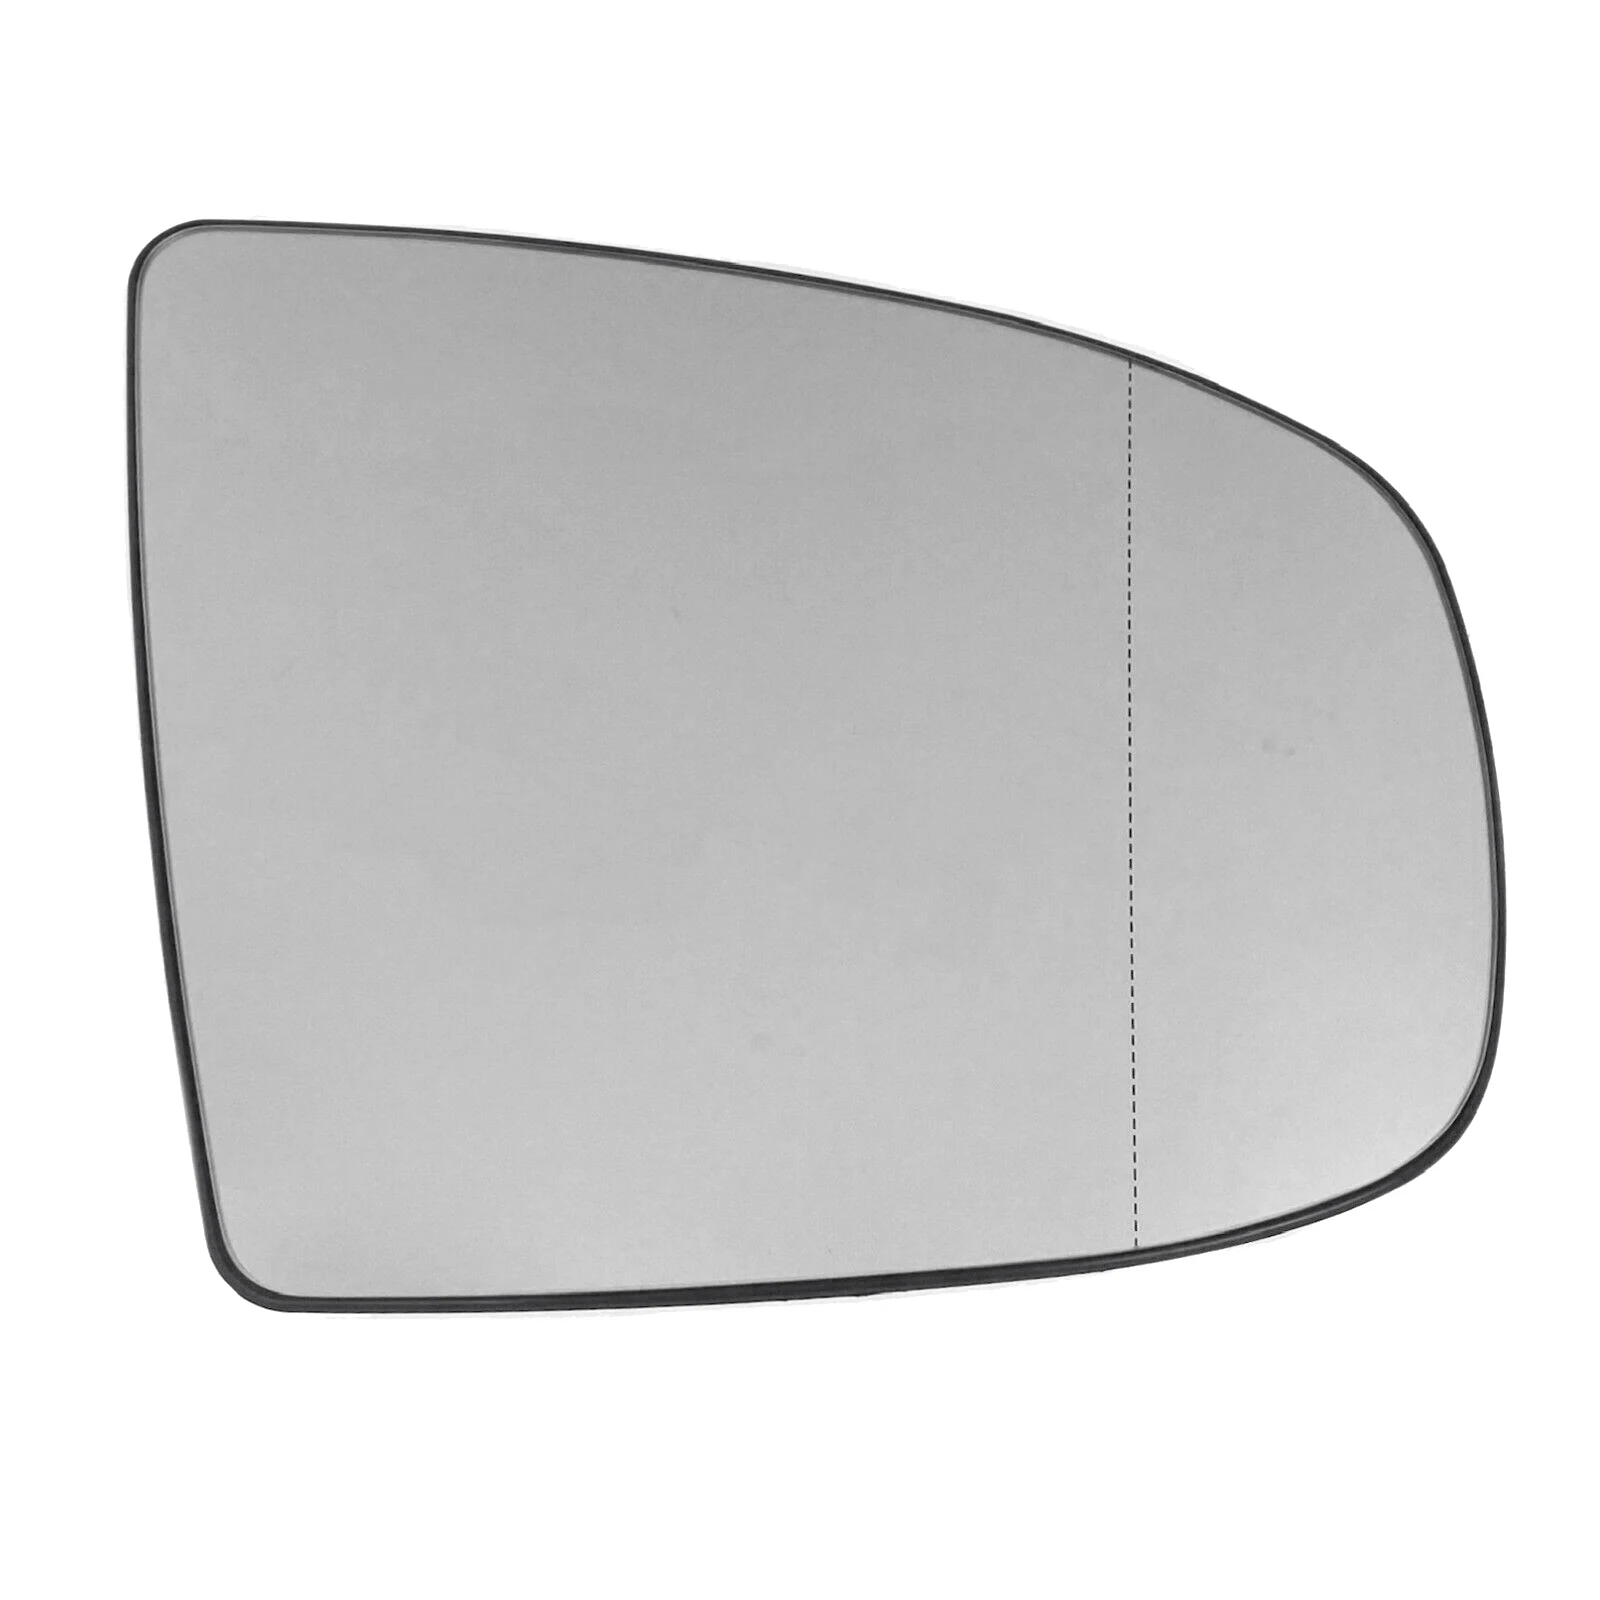 

Right Side Rear View Mirror Side Mirror Glass Heated + Adjustment for BMW X5 E70 2007-2013 X6 E71 E72 2008-2014